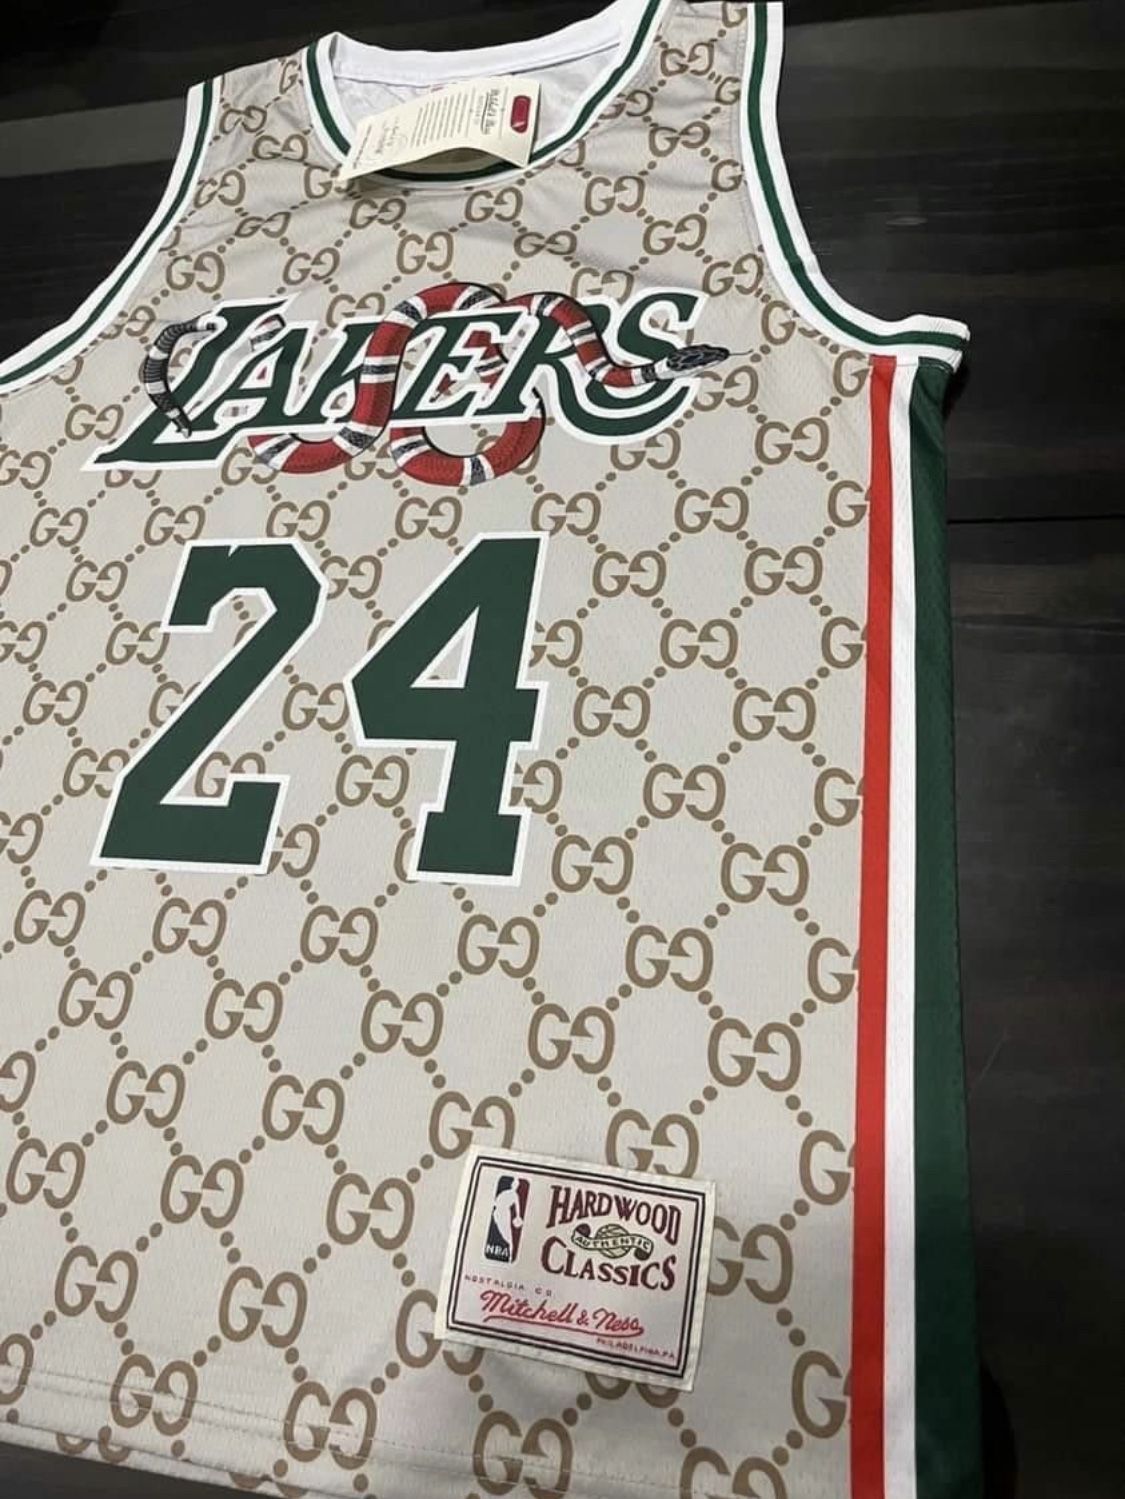 Lakers Kobe Bryant Gucci Jersey for Sale in Detroit, MI - OfferUp